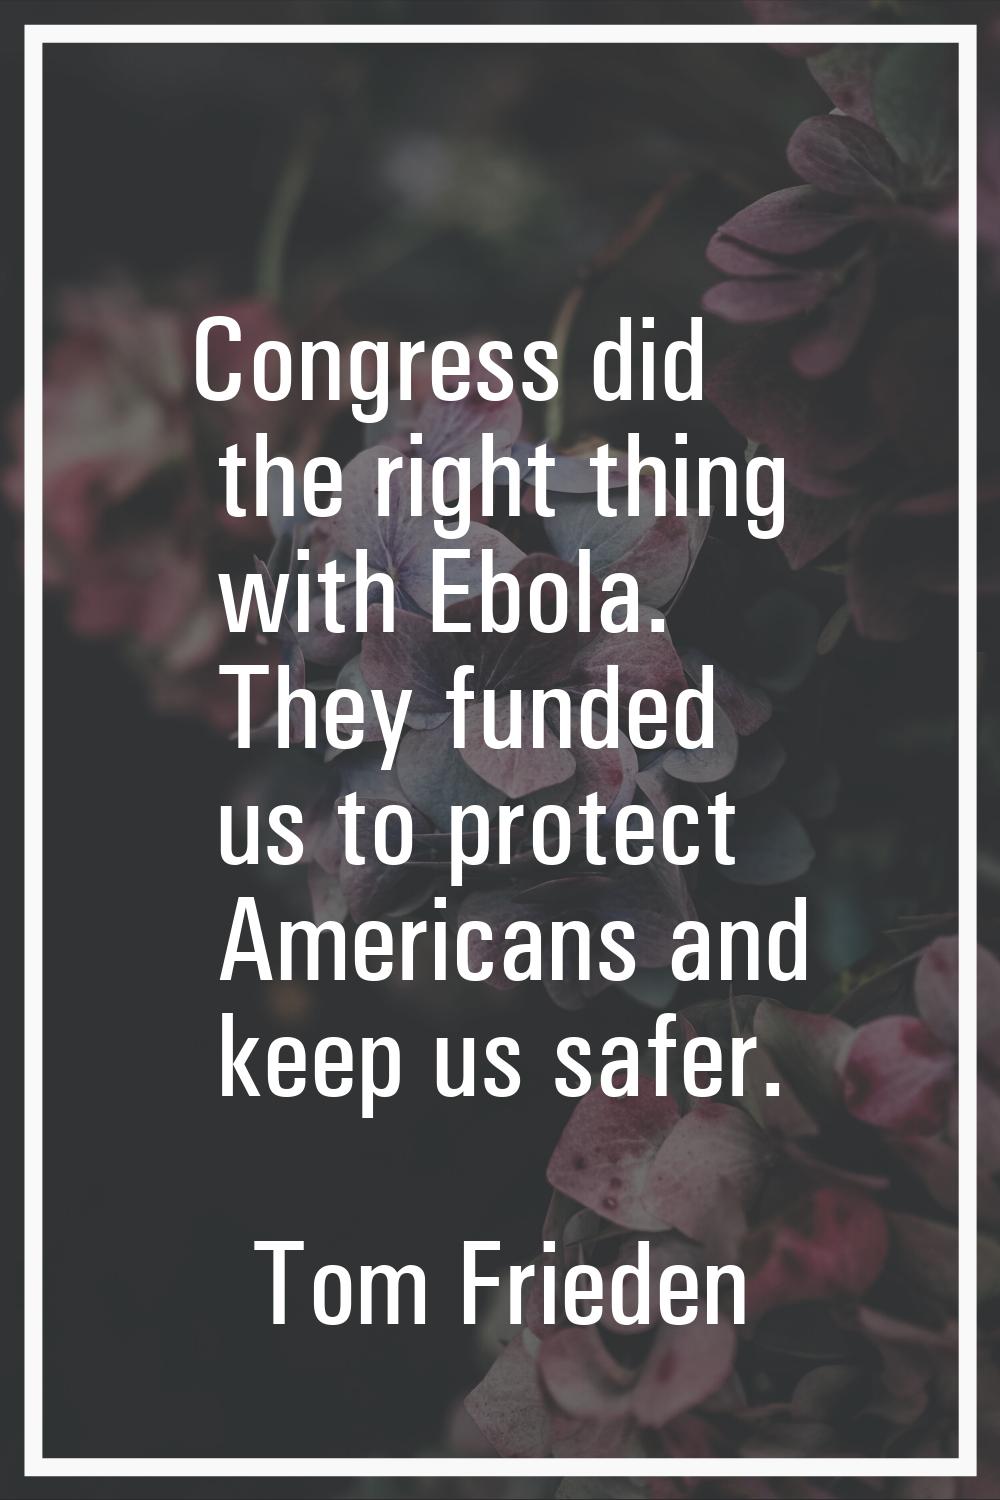 Congress did the right thing with Ebola. They funded us to protect Americans and keep us safer.